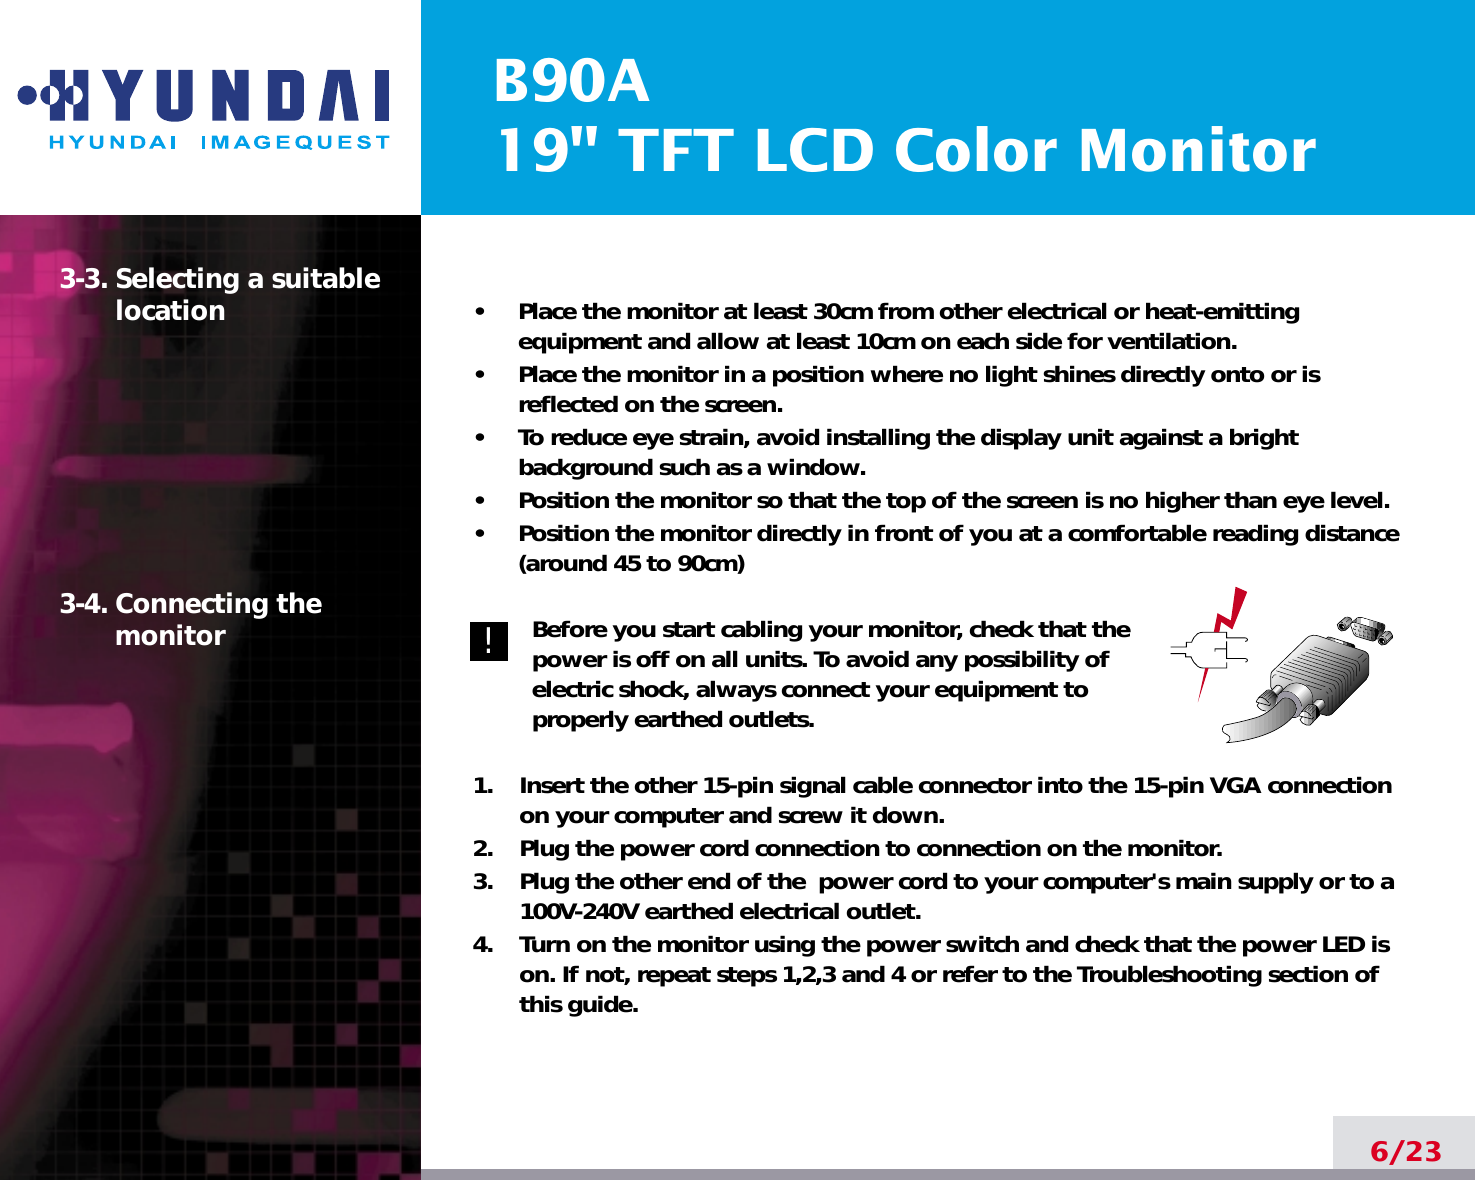 B90A19&quot; TFT LCD Color Monitor6/233-3. Selecting a suitablelocation3-4. Connecting the monitor•     Place the monitor at least 30cm from other electrical or heat-emittingequipment and allow at least 10cm on each side for ventilation.•     Place the monitor in a position where no light shines directly onto or isreflected on the screen.•     To reduce eye strain, avoid installing the display unit against a brightbackground such as a window.•     Position the monitor so that the top of the screen is no higher than eye level.•     Position the monitor directly in front of you at a comfortable reading distance(around 45 to 90cm) Before you start cabling your monitor, check that thepower is off on all units. To avoid any possibility ofelectric shock, always connect your equipment toproperly earthed outlets.1.    Insert the other 15-pin signal cable connector into the 15-pin VGA connectionon your computer and screw it down. 2.    Plug the power cord connection to connection on the monitor.3.    Plug the other end of the  power cord to your computer&apos;s main supply or to a100V-240V earthed electrical outlet.4.    Turn on the monitor using the power switch and check that the power LED ison. If not, repeat steps 1,2,3 and 4 or refer to the Troubleshooting section ofthis guide.!!